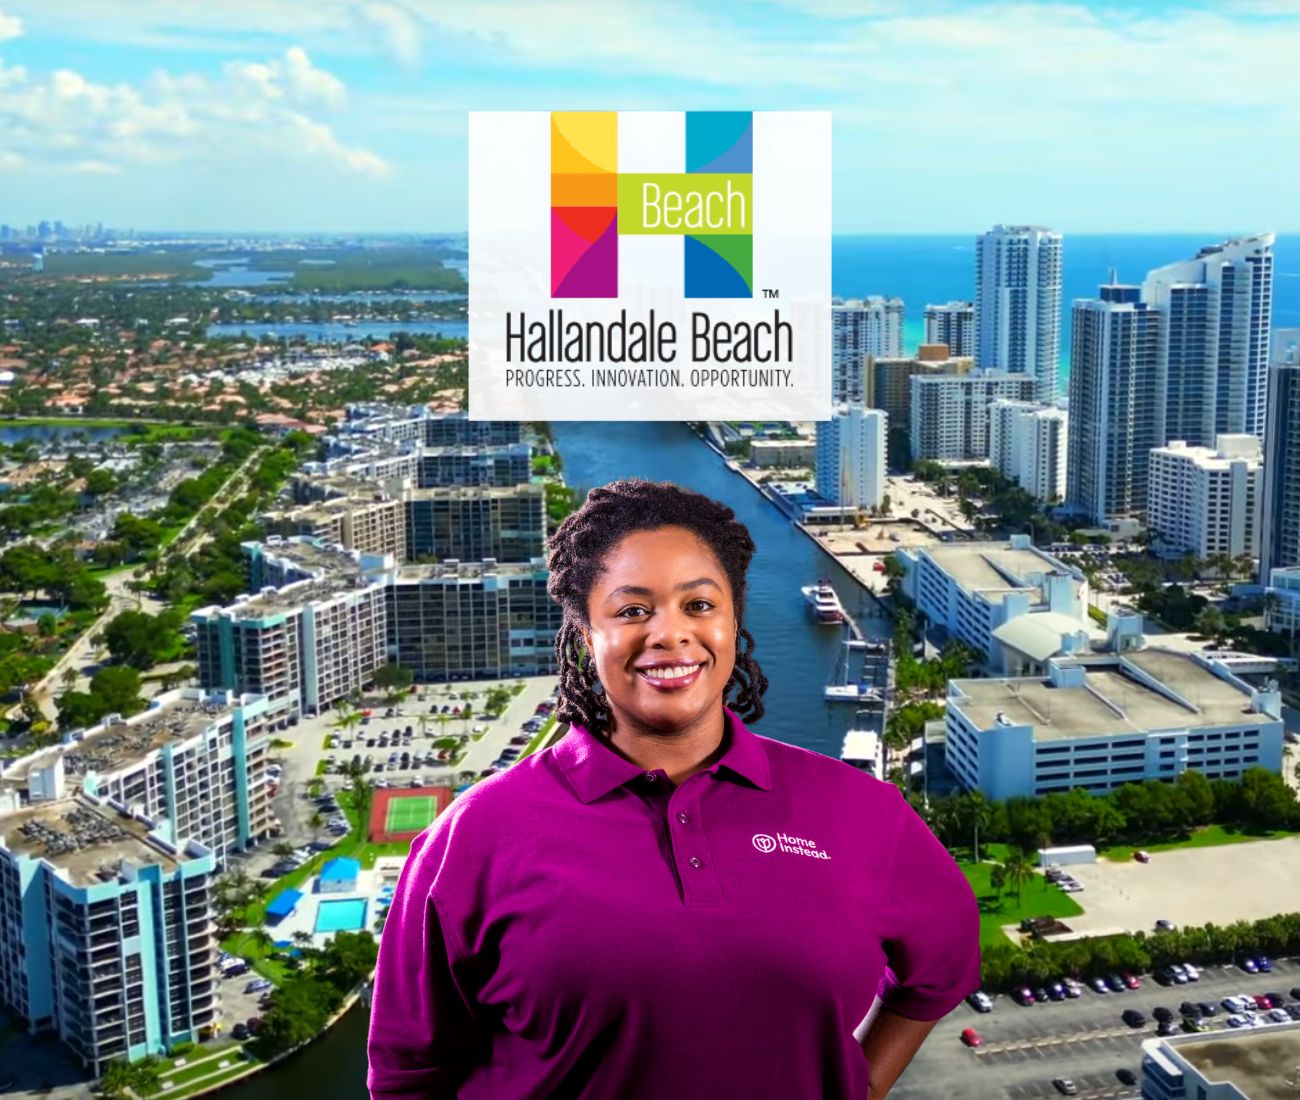 Home Instead caregiver with Hallandale Beach, FL in the background